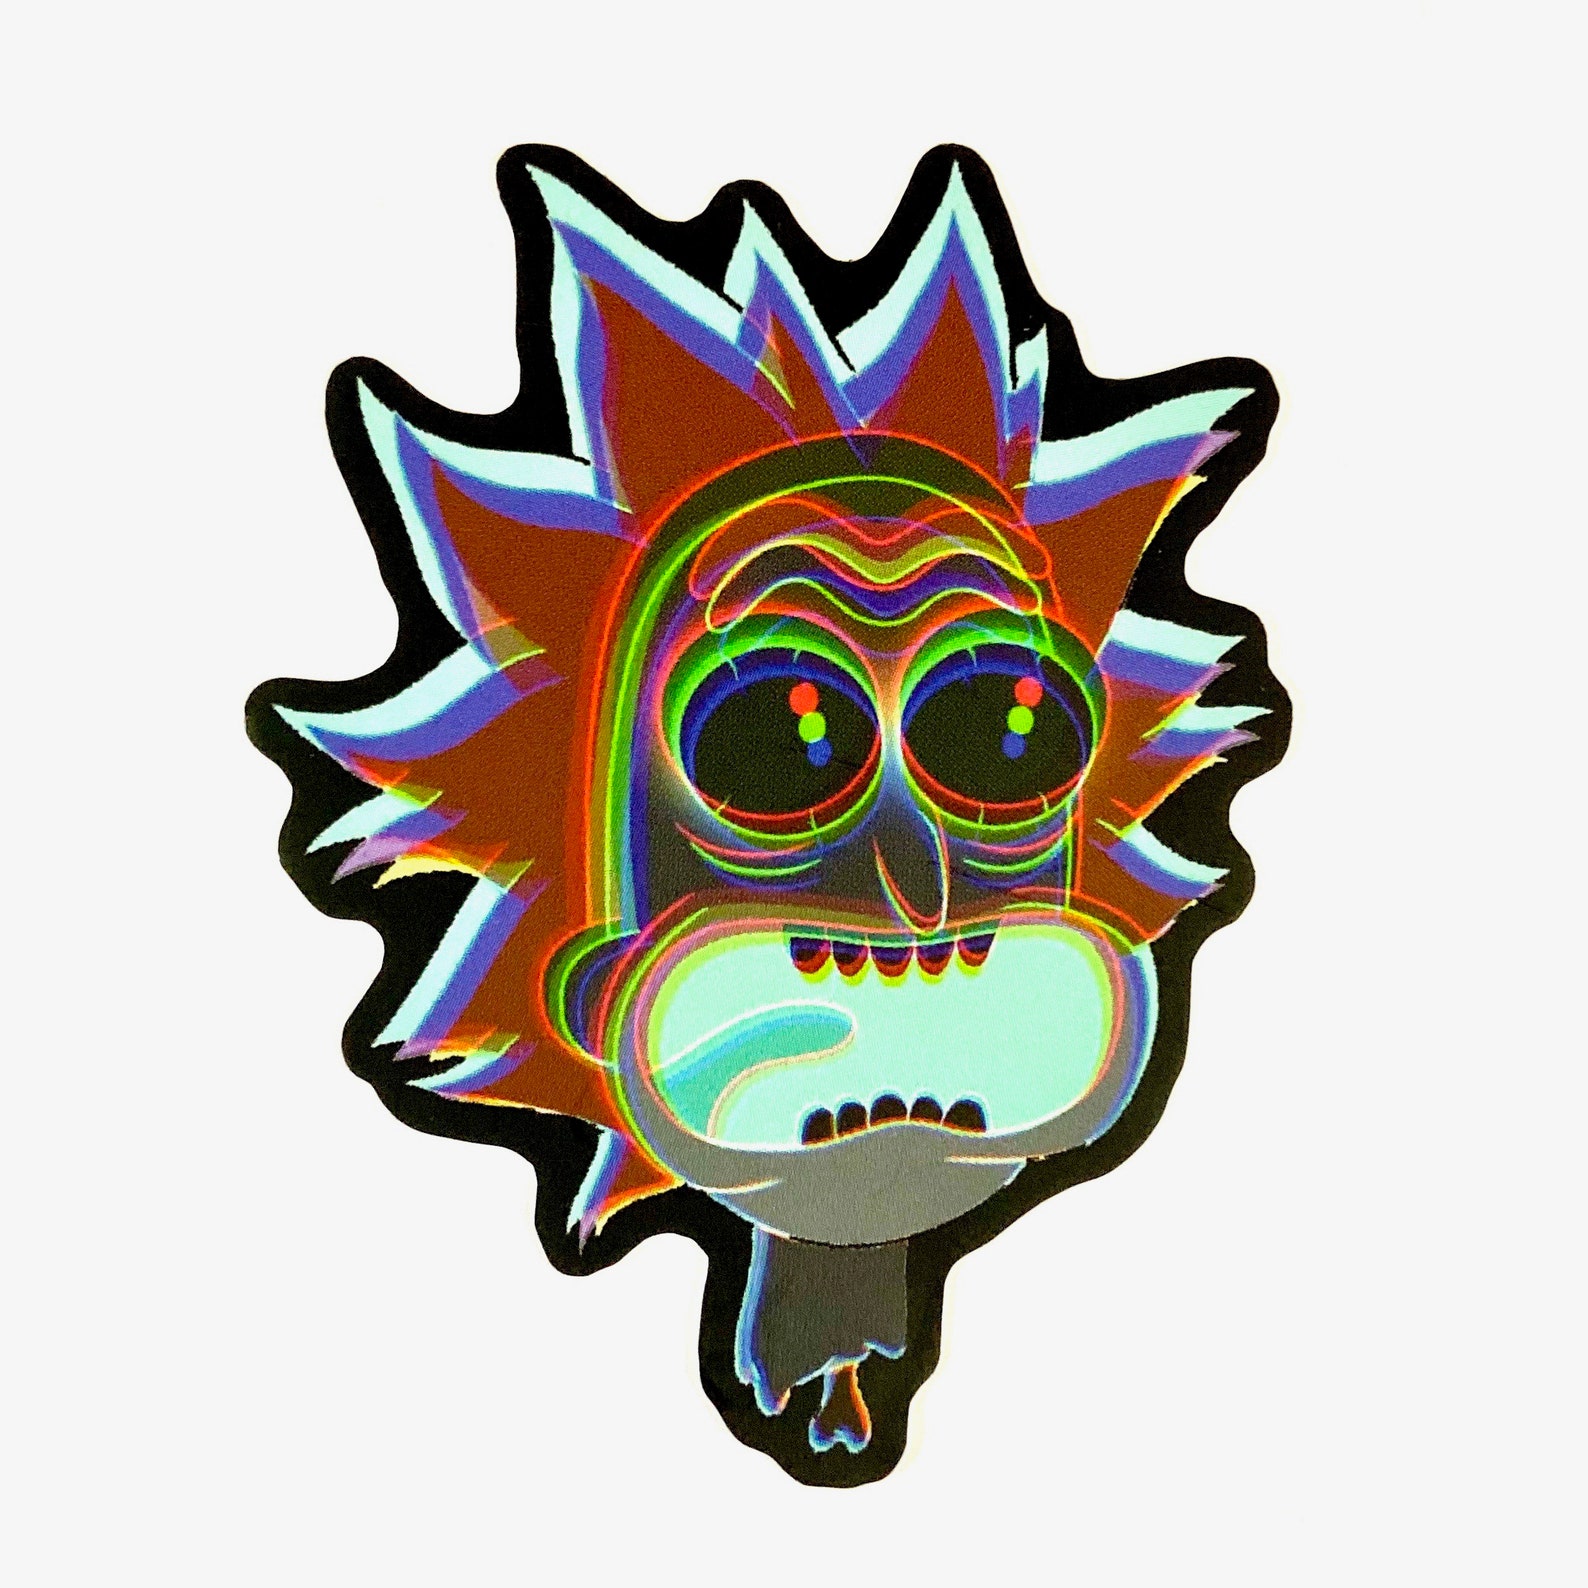 Inverted Rick and Morty Glitch Sticker | Etsy